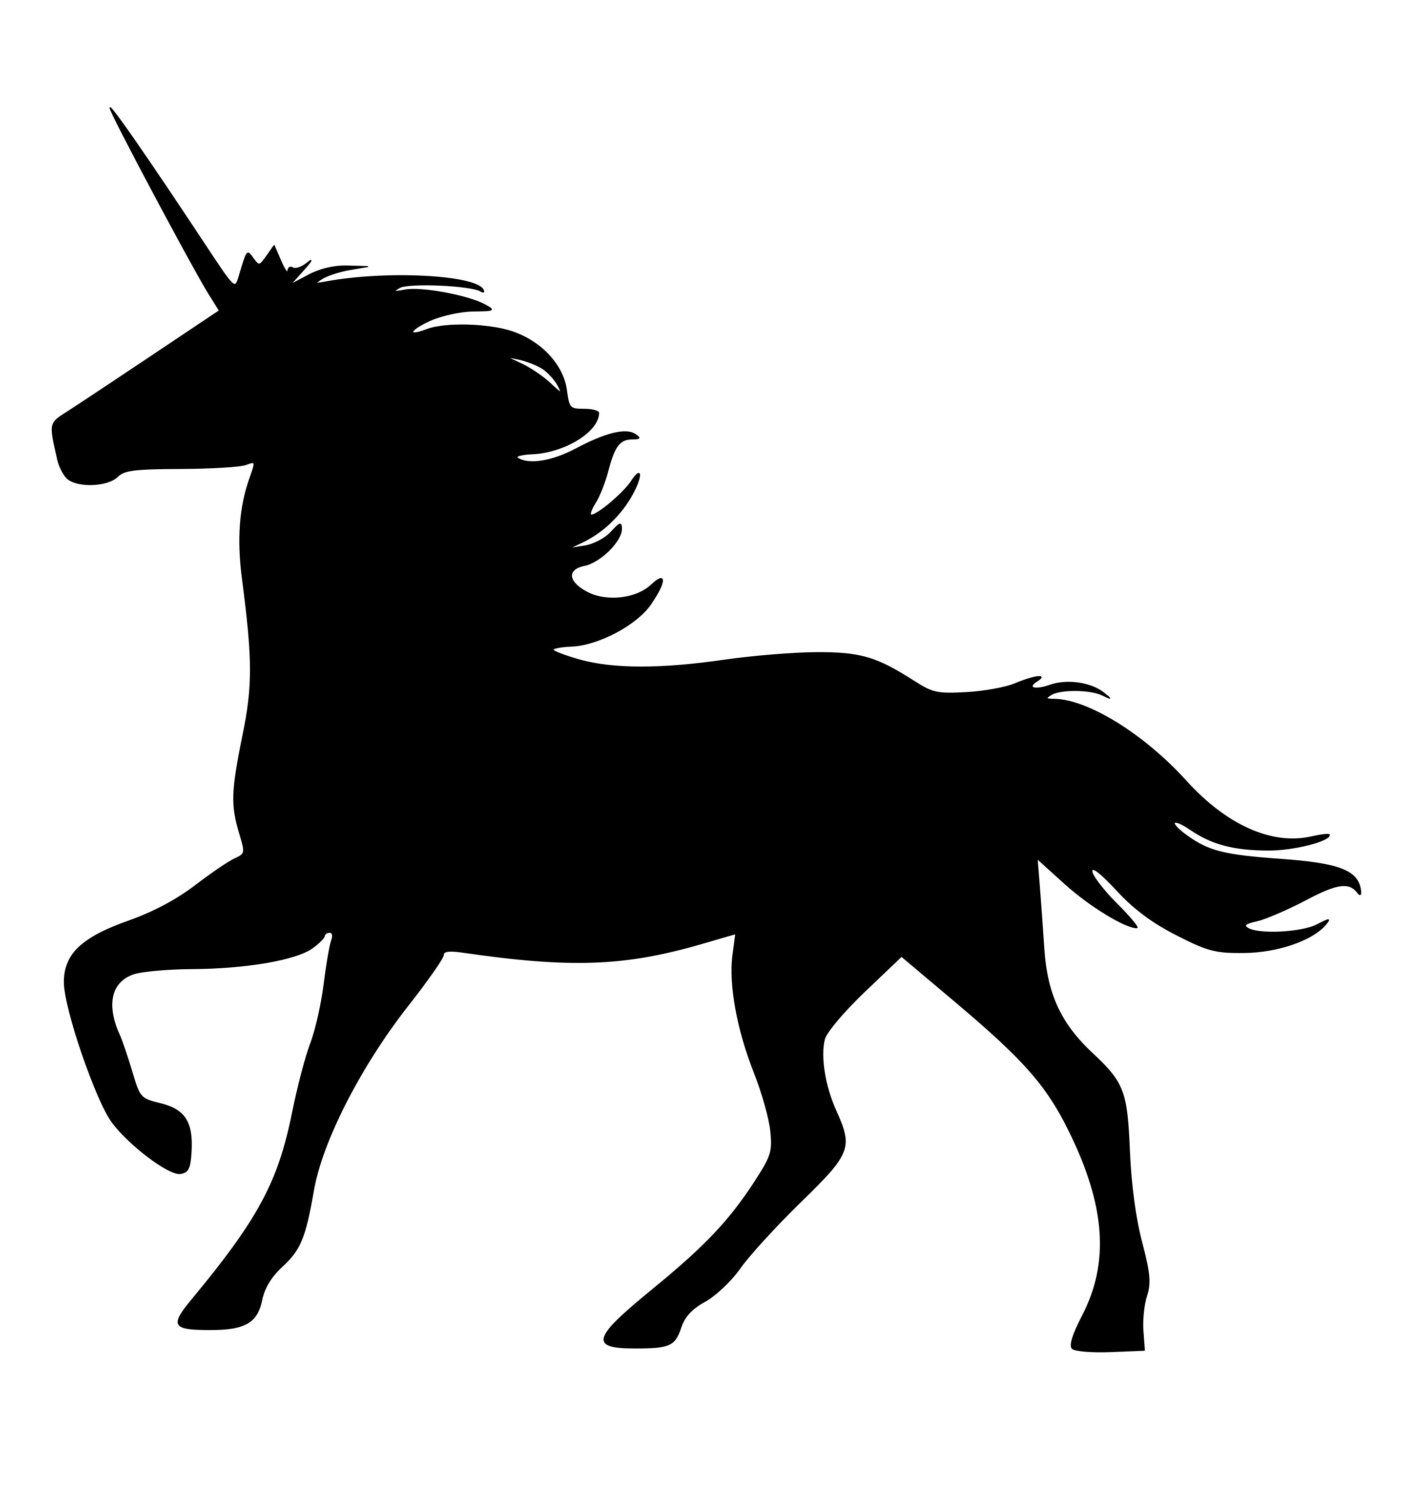 Unicorn Head Silhouette - Free Clipart Images